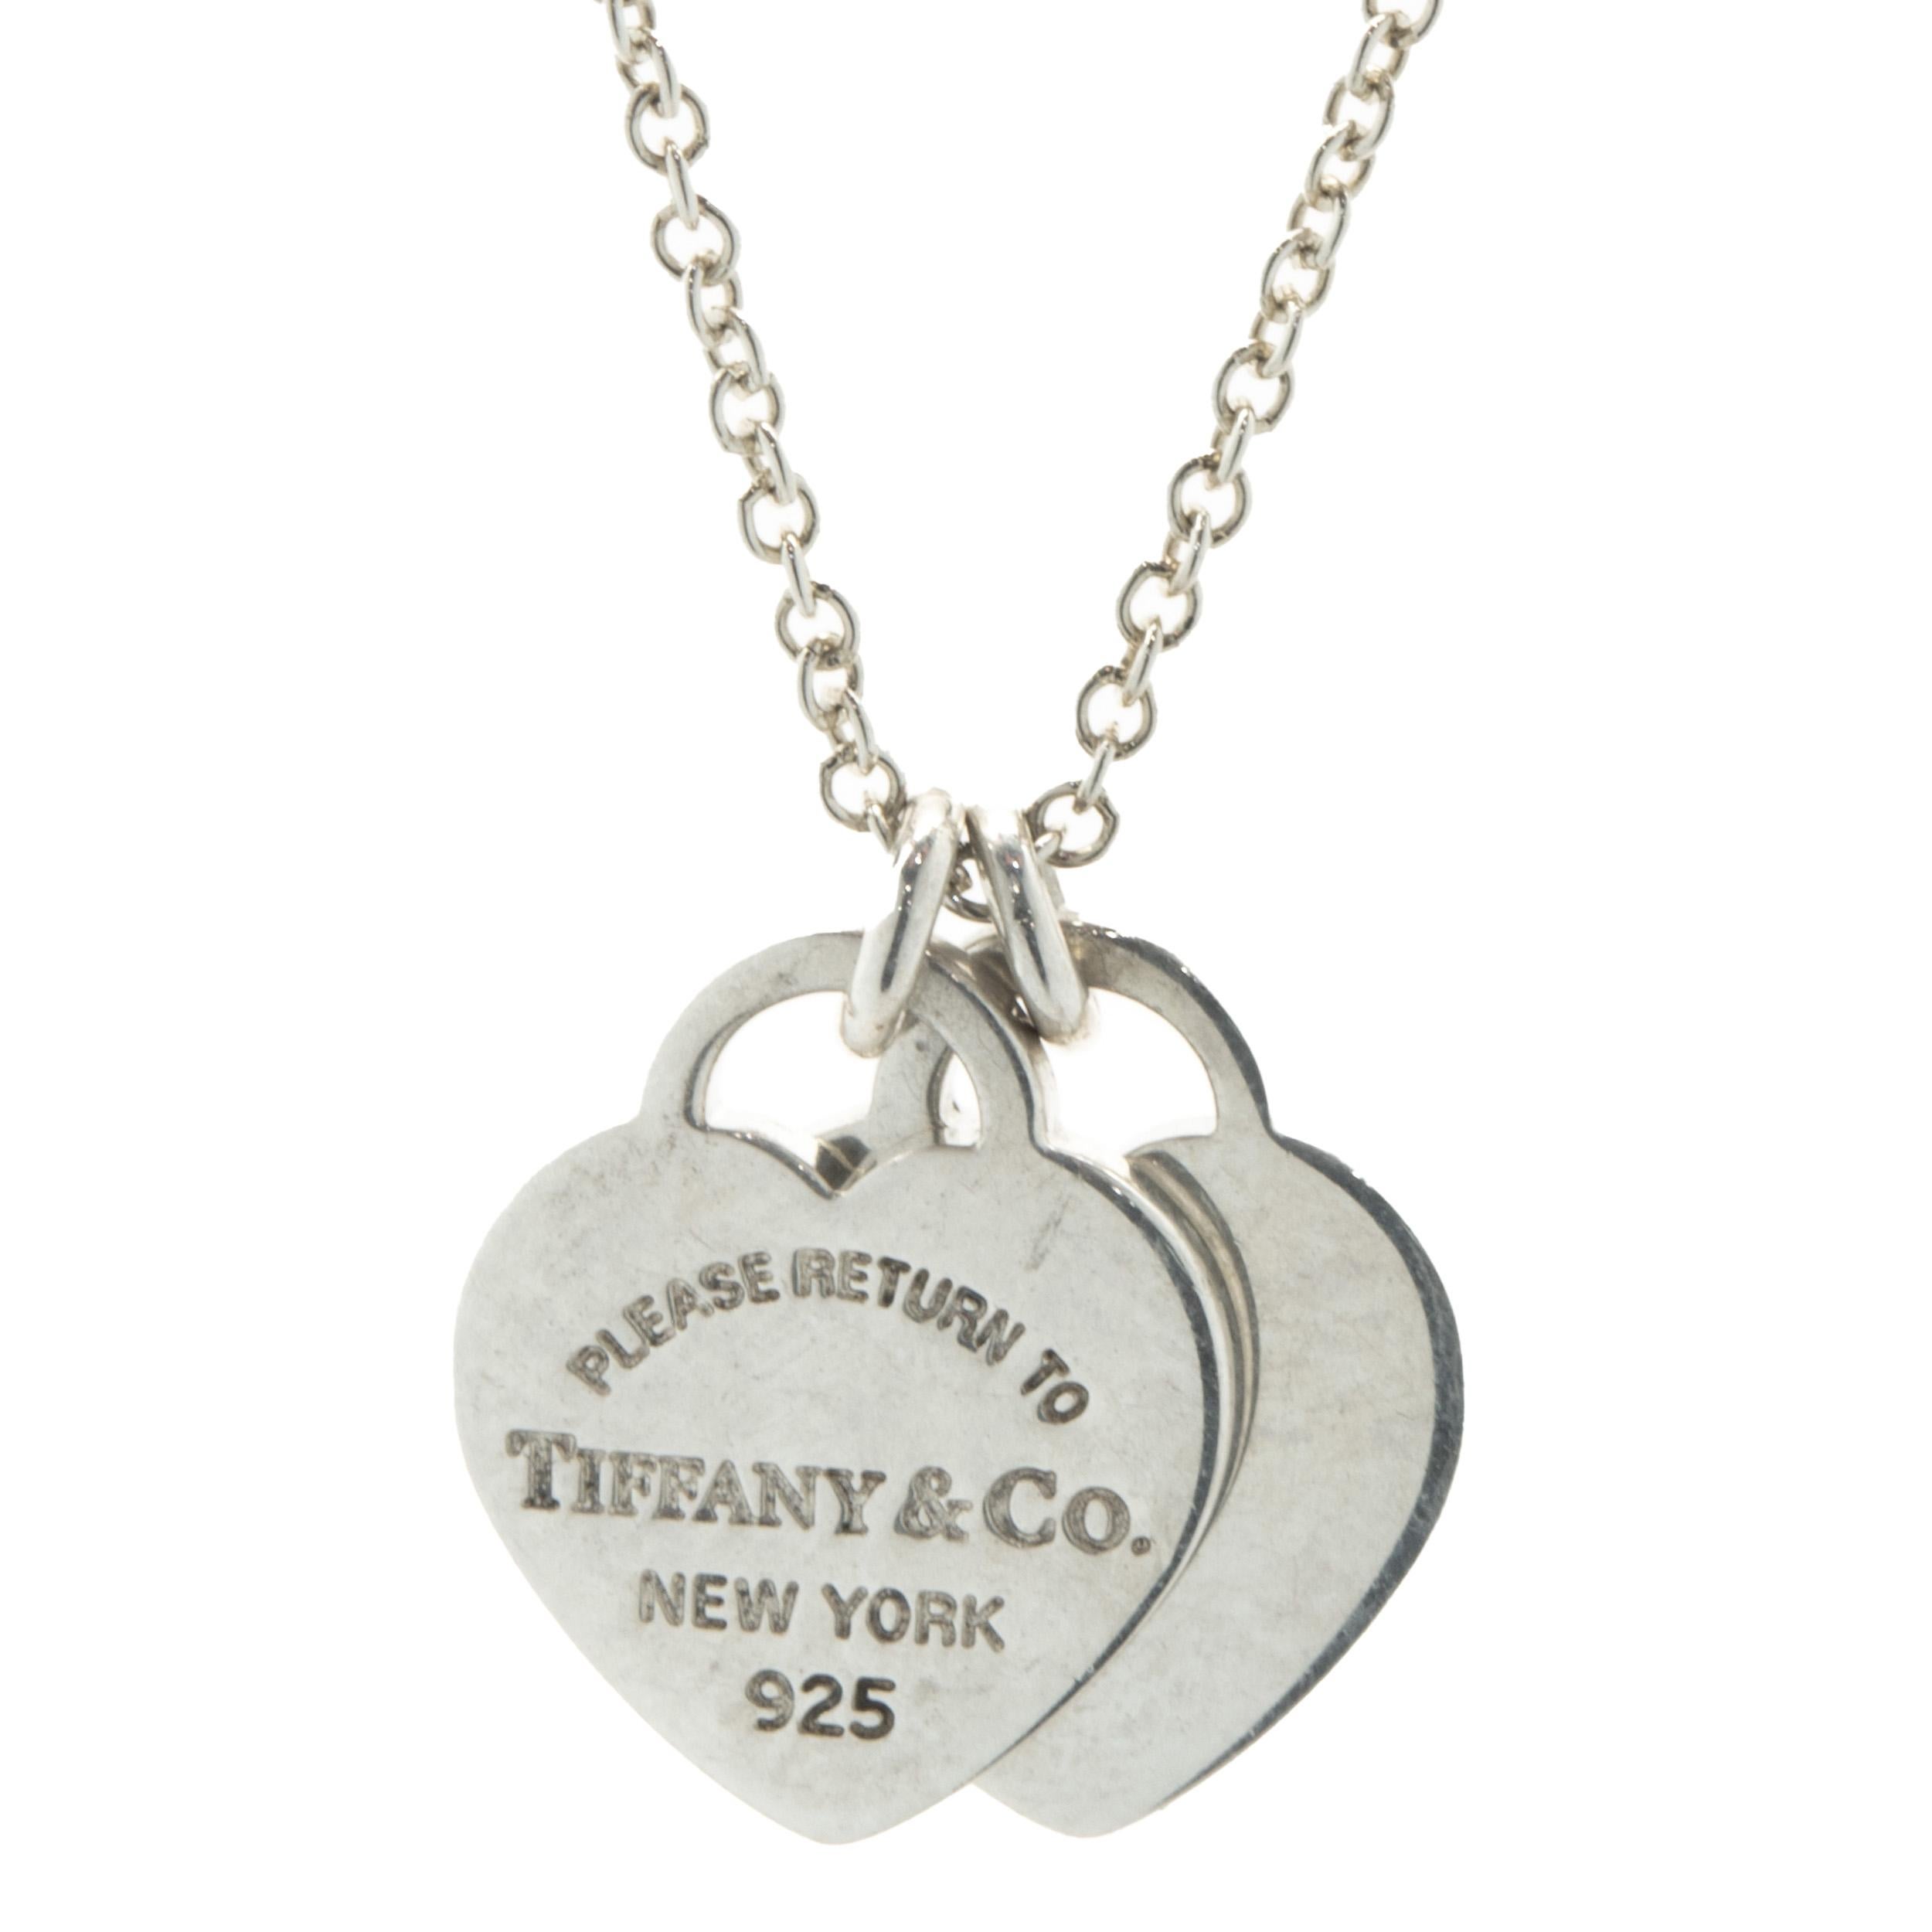 Designer: Tiffany & Co. 
Material: sterling silver
Dimensions: necklace measures 16-inches
Weight: 2.93 grams
